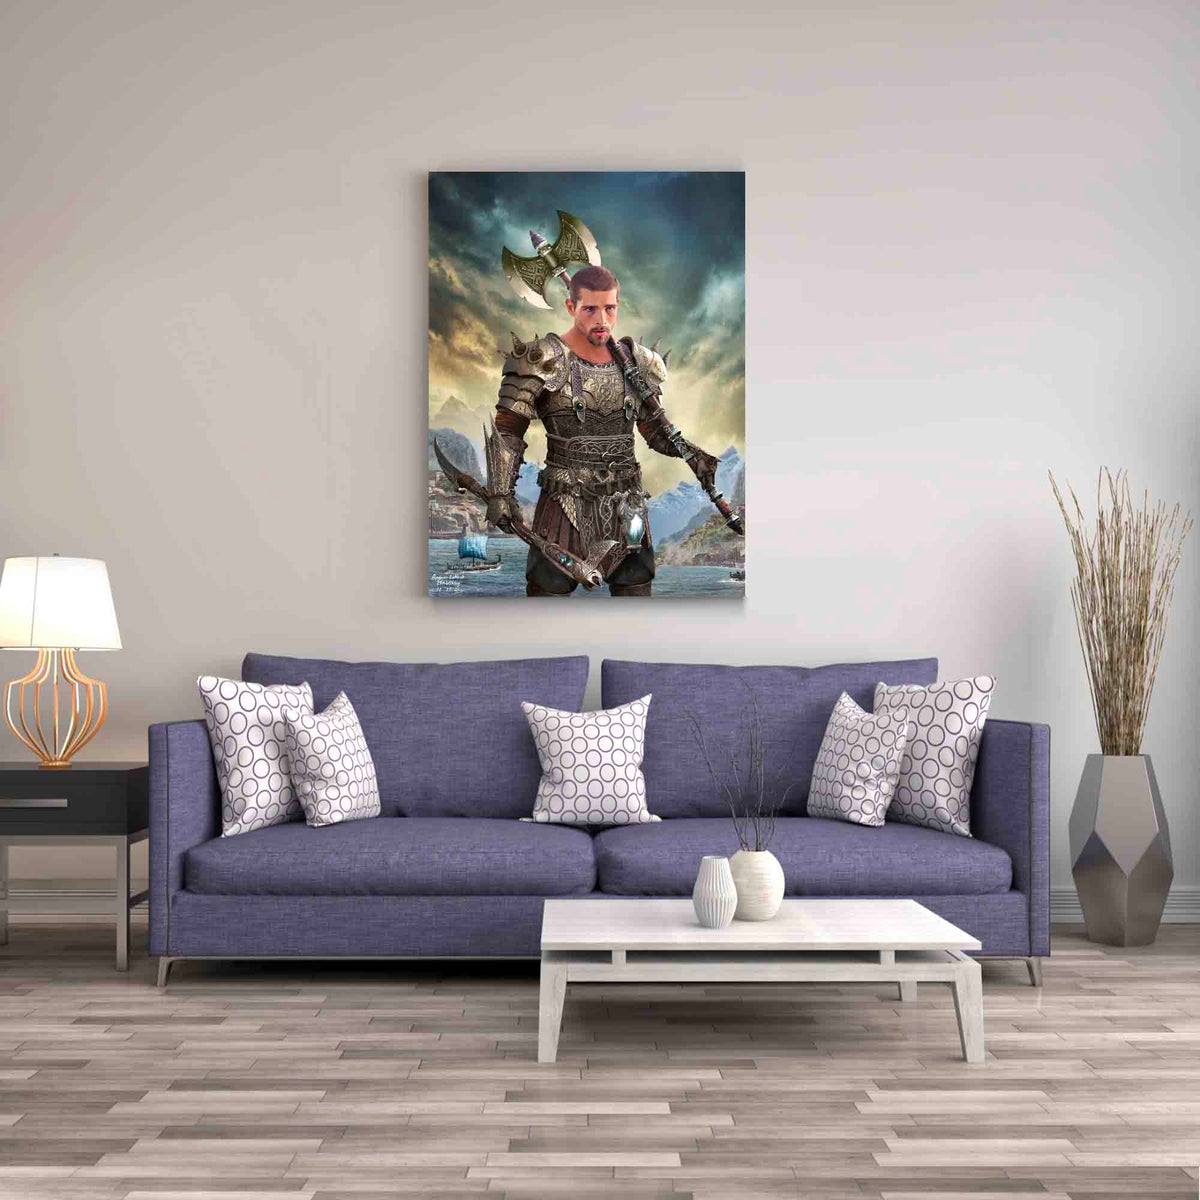 black and gold retro wall art of a man in warrior costume